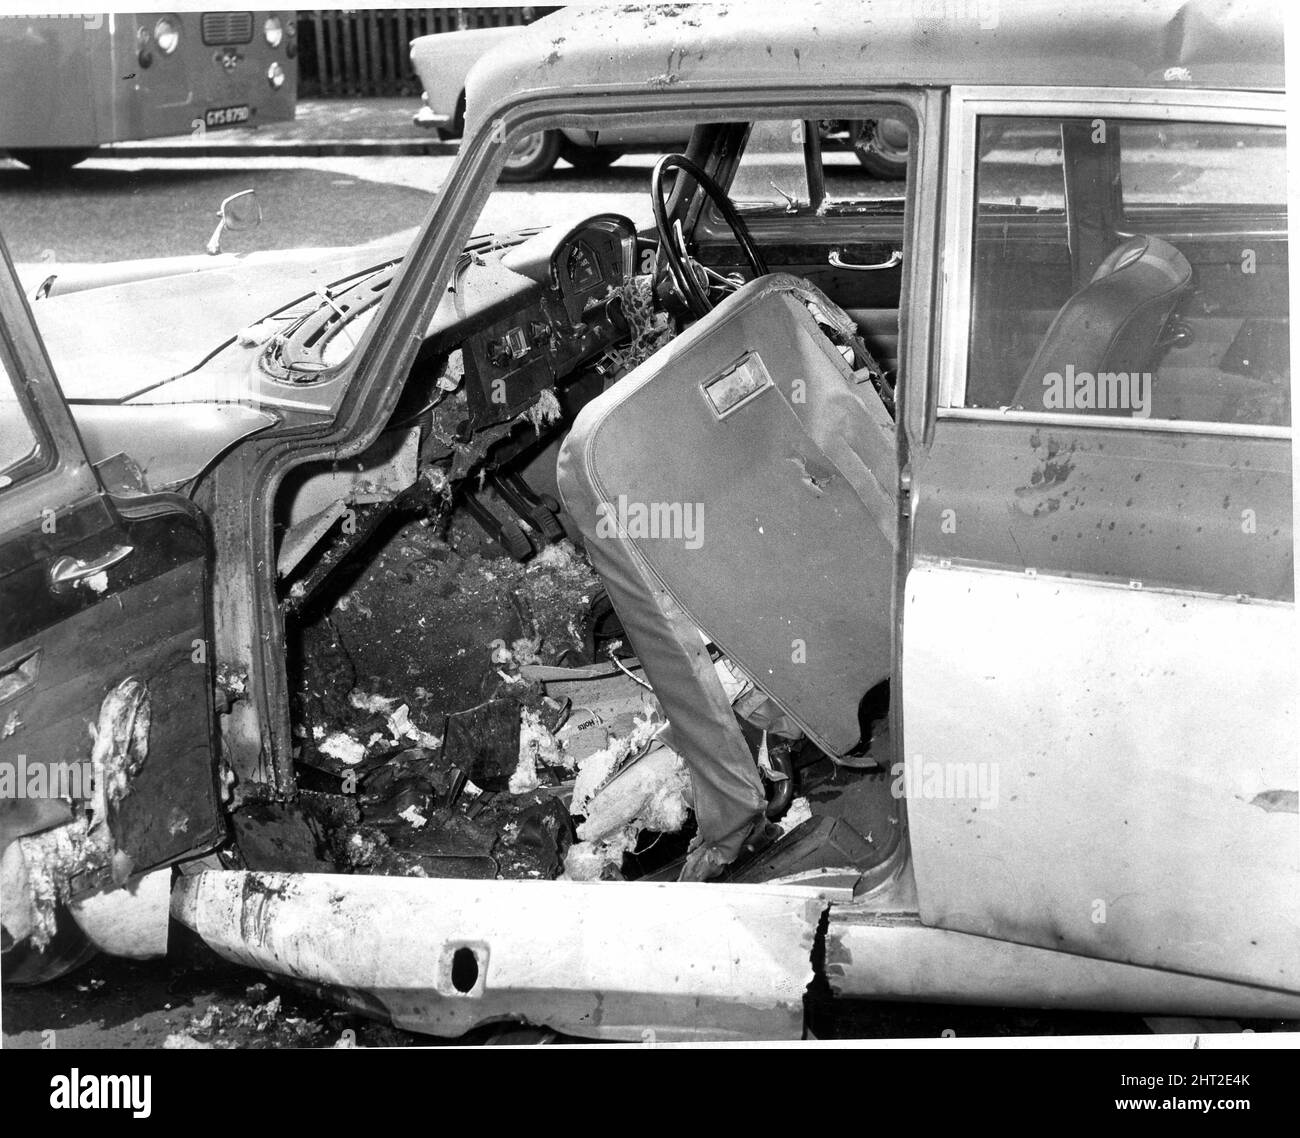 Arthur Thompson Snr, Glasgow gangster. His car a M.G Magnette after it exploded killing his mother in law Maggie Johnson. Thomson was seriously injured. August 1966. Stock Photo